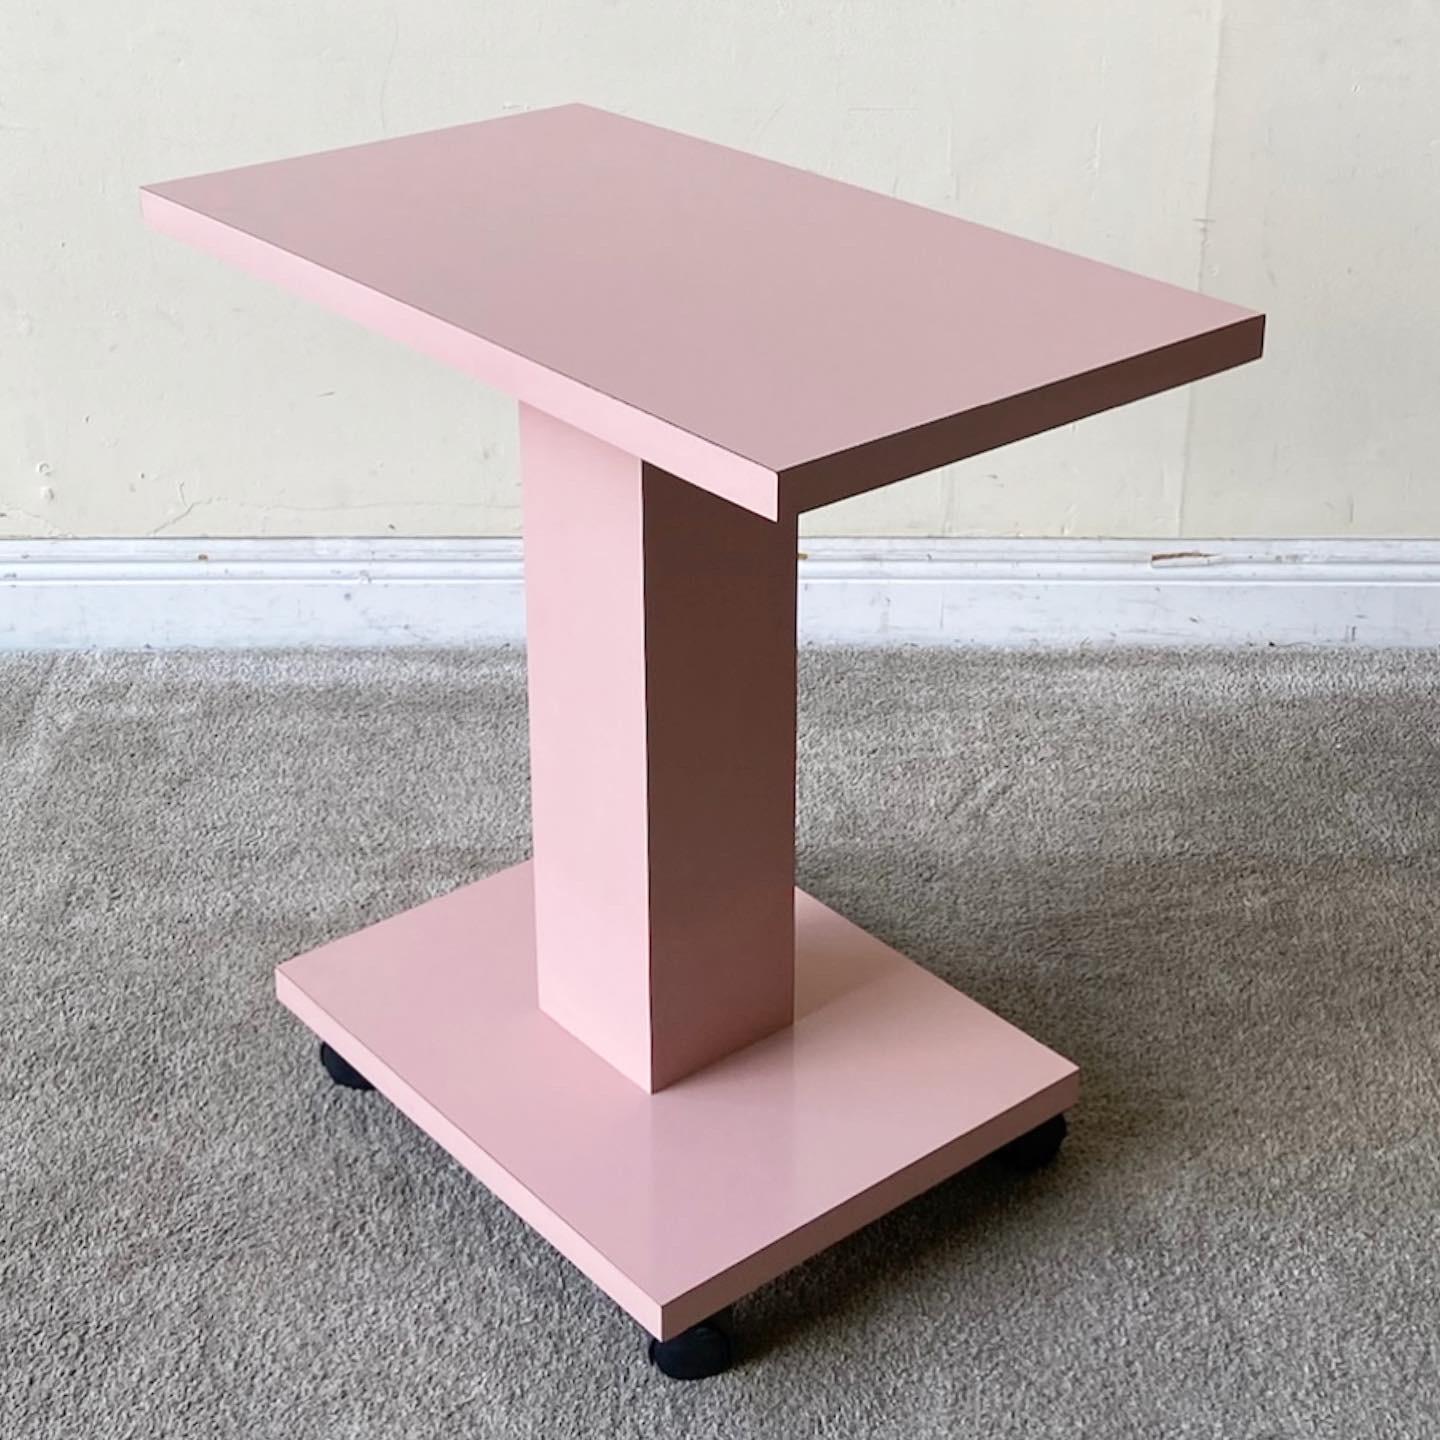 Amazing 1980s postmodern side table/cart. Features a pink lacquer laminate and site on 4 wheels.
 